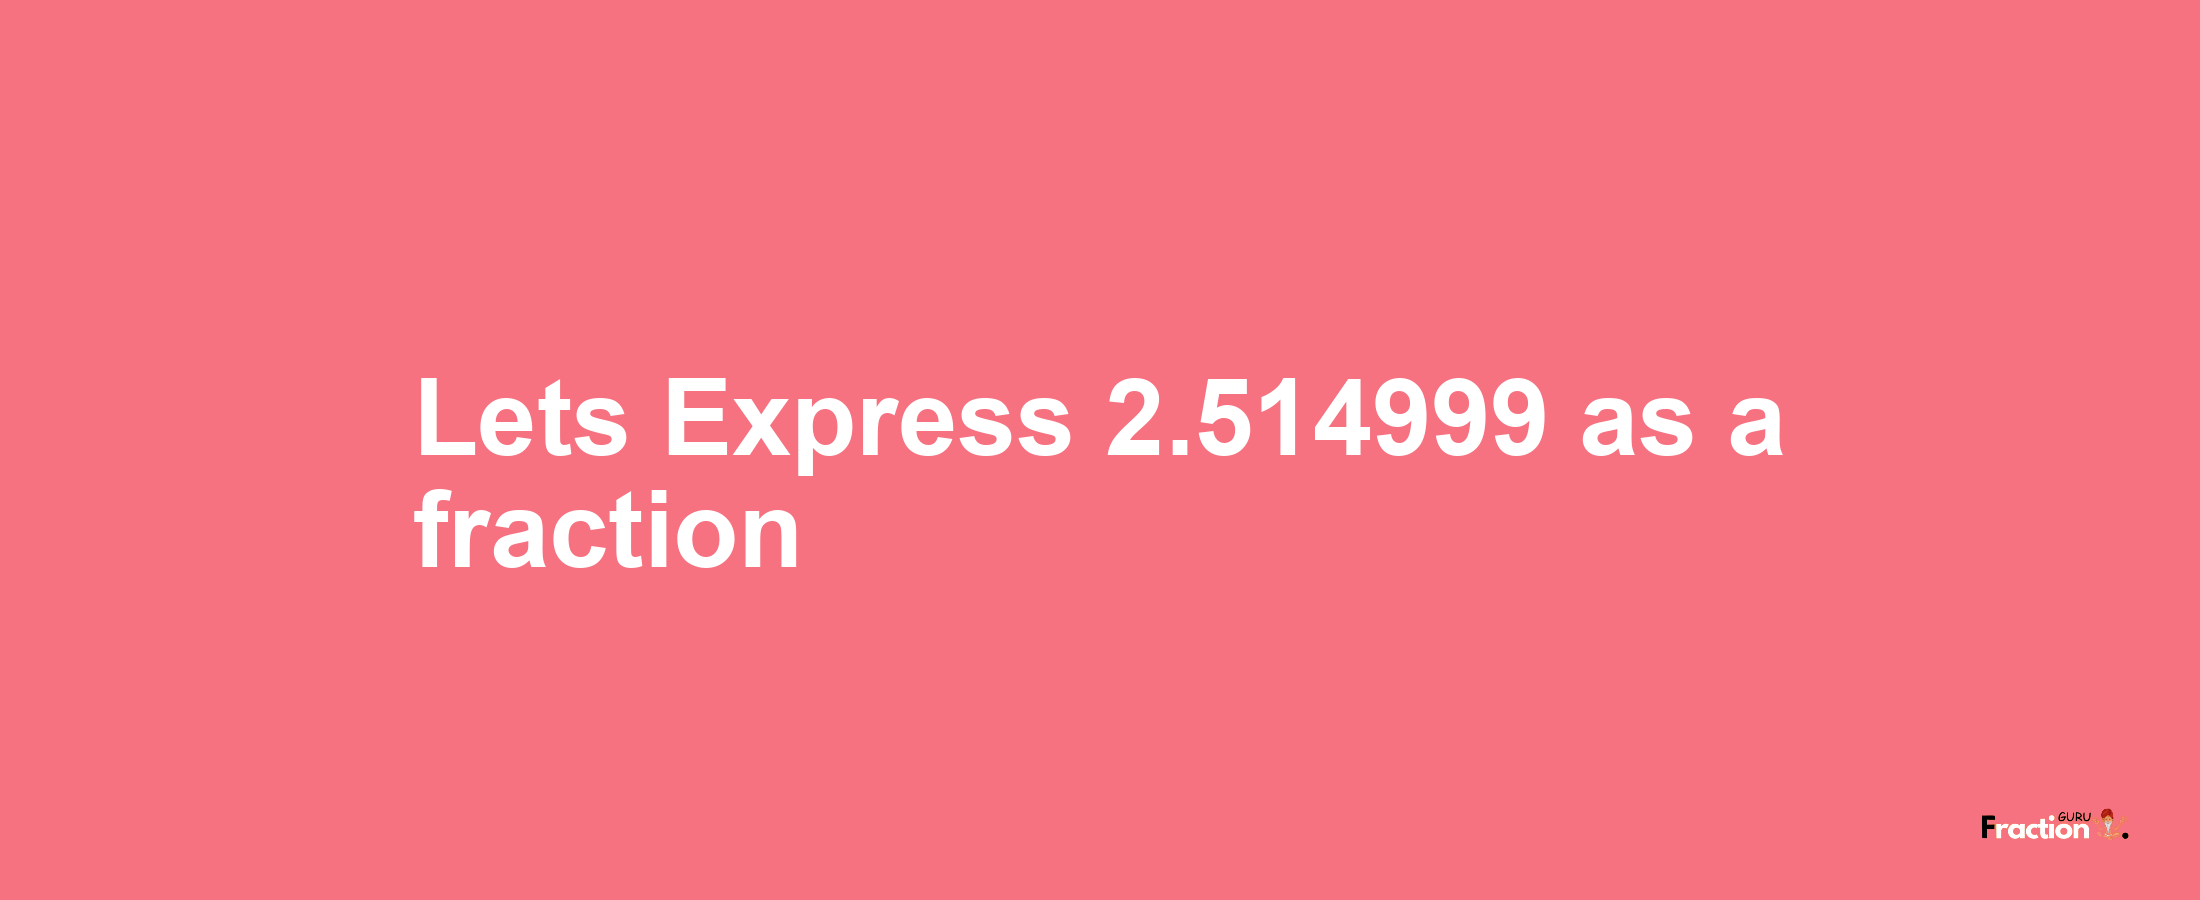 Lets Express 2.514999 as afraction